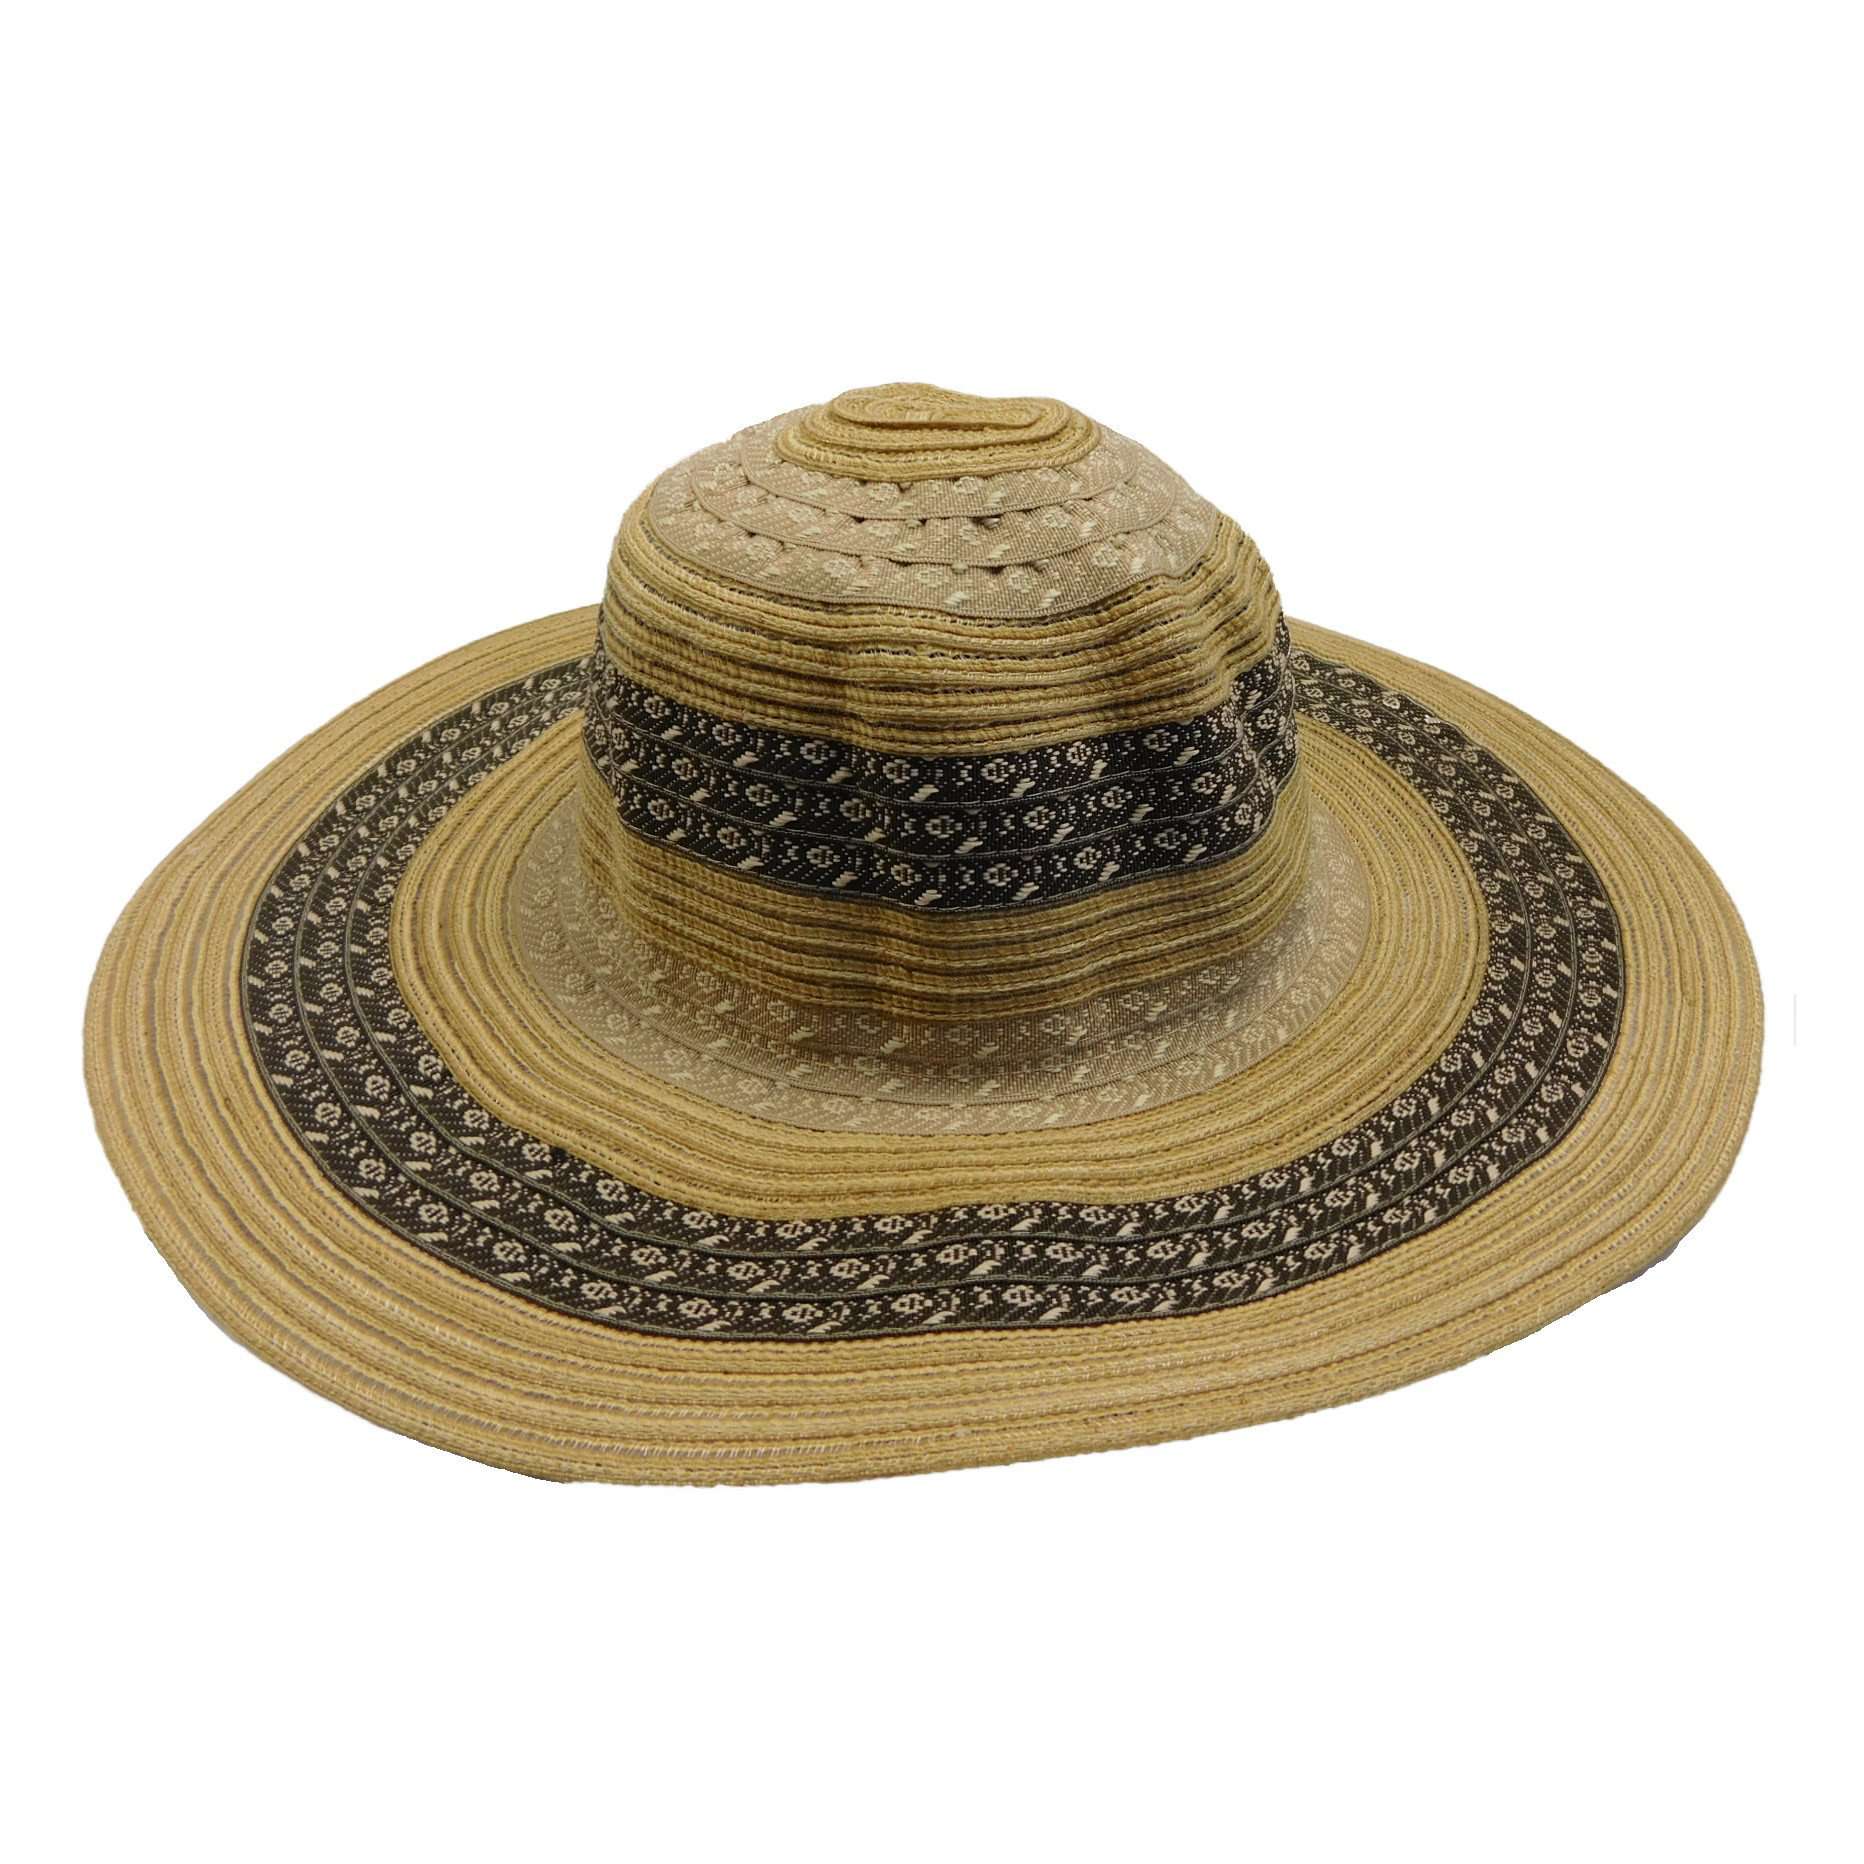 Ribbon and Straw Sun Hat with Tribal Motif, Floppy Hat - SetarTrading Hats 